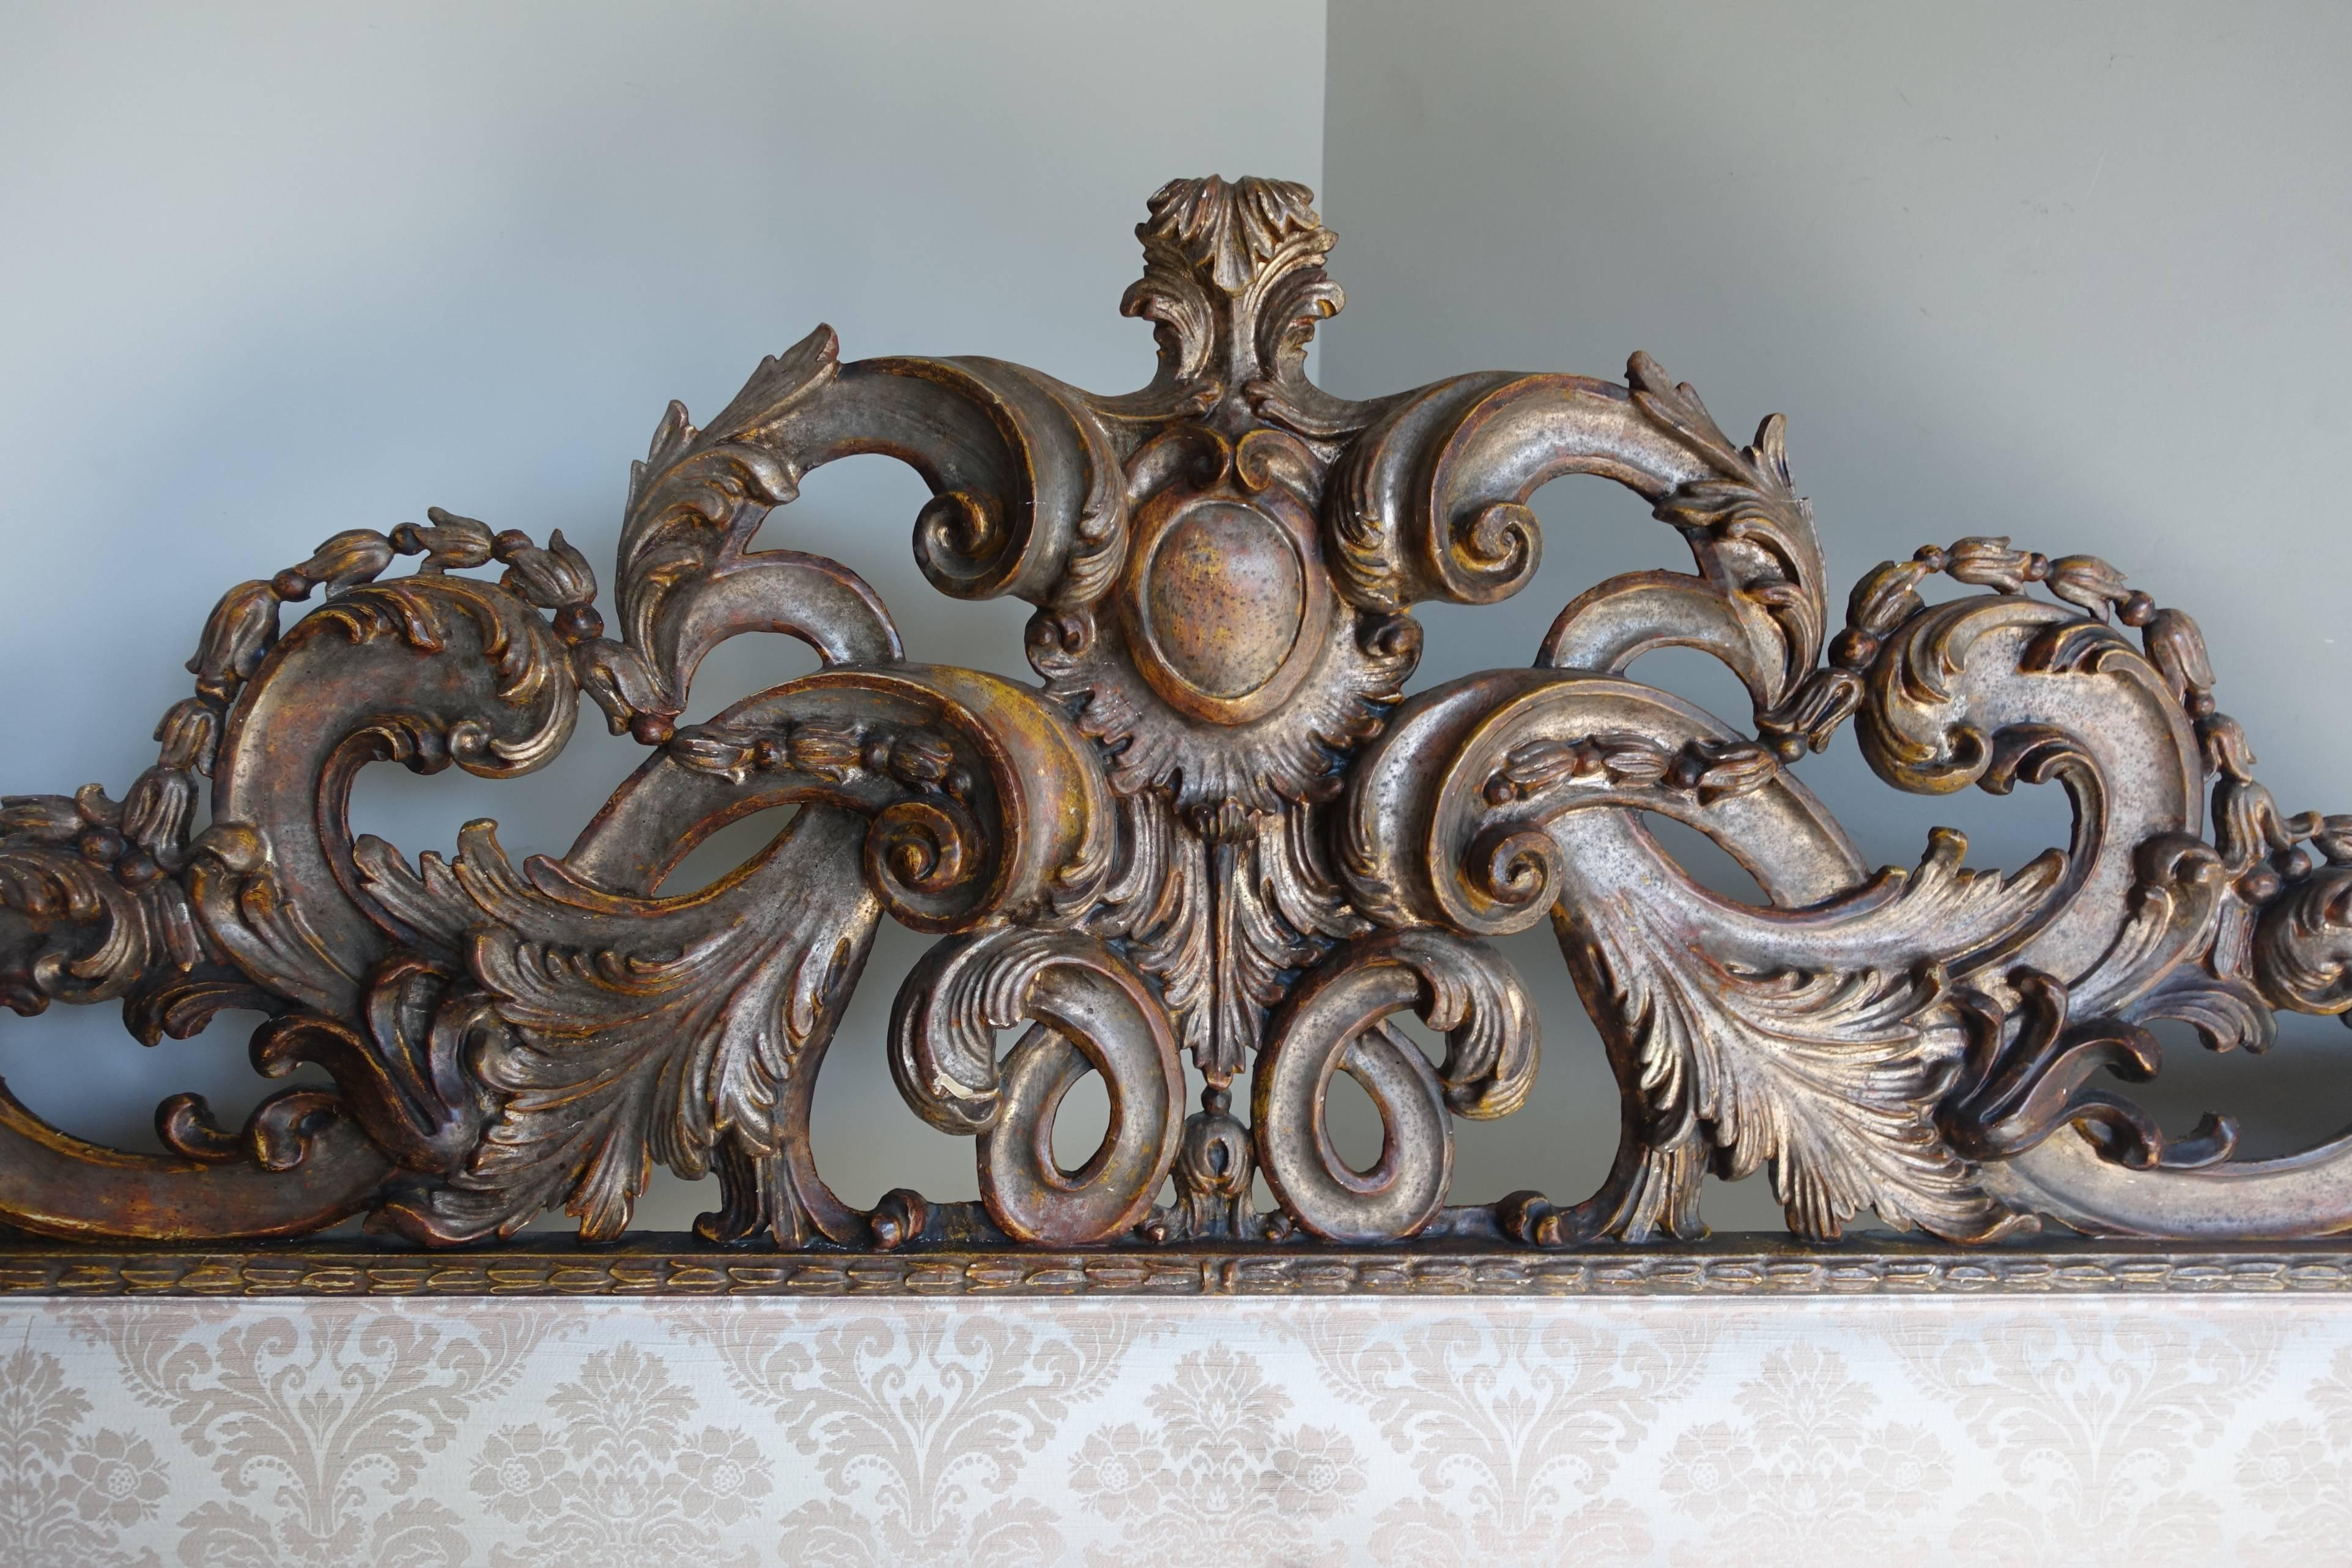 Italian carved headboard with a beautiful worn borghese finish combining soft faded paint with faded silvery gold highlights. Upholstered in a cream colored floral damask that can be easily changed to go with your decor.